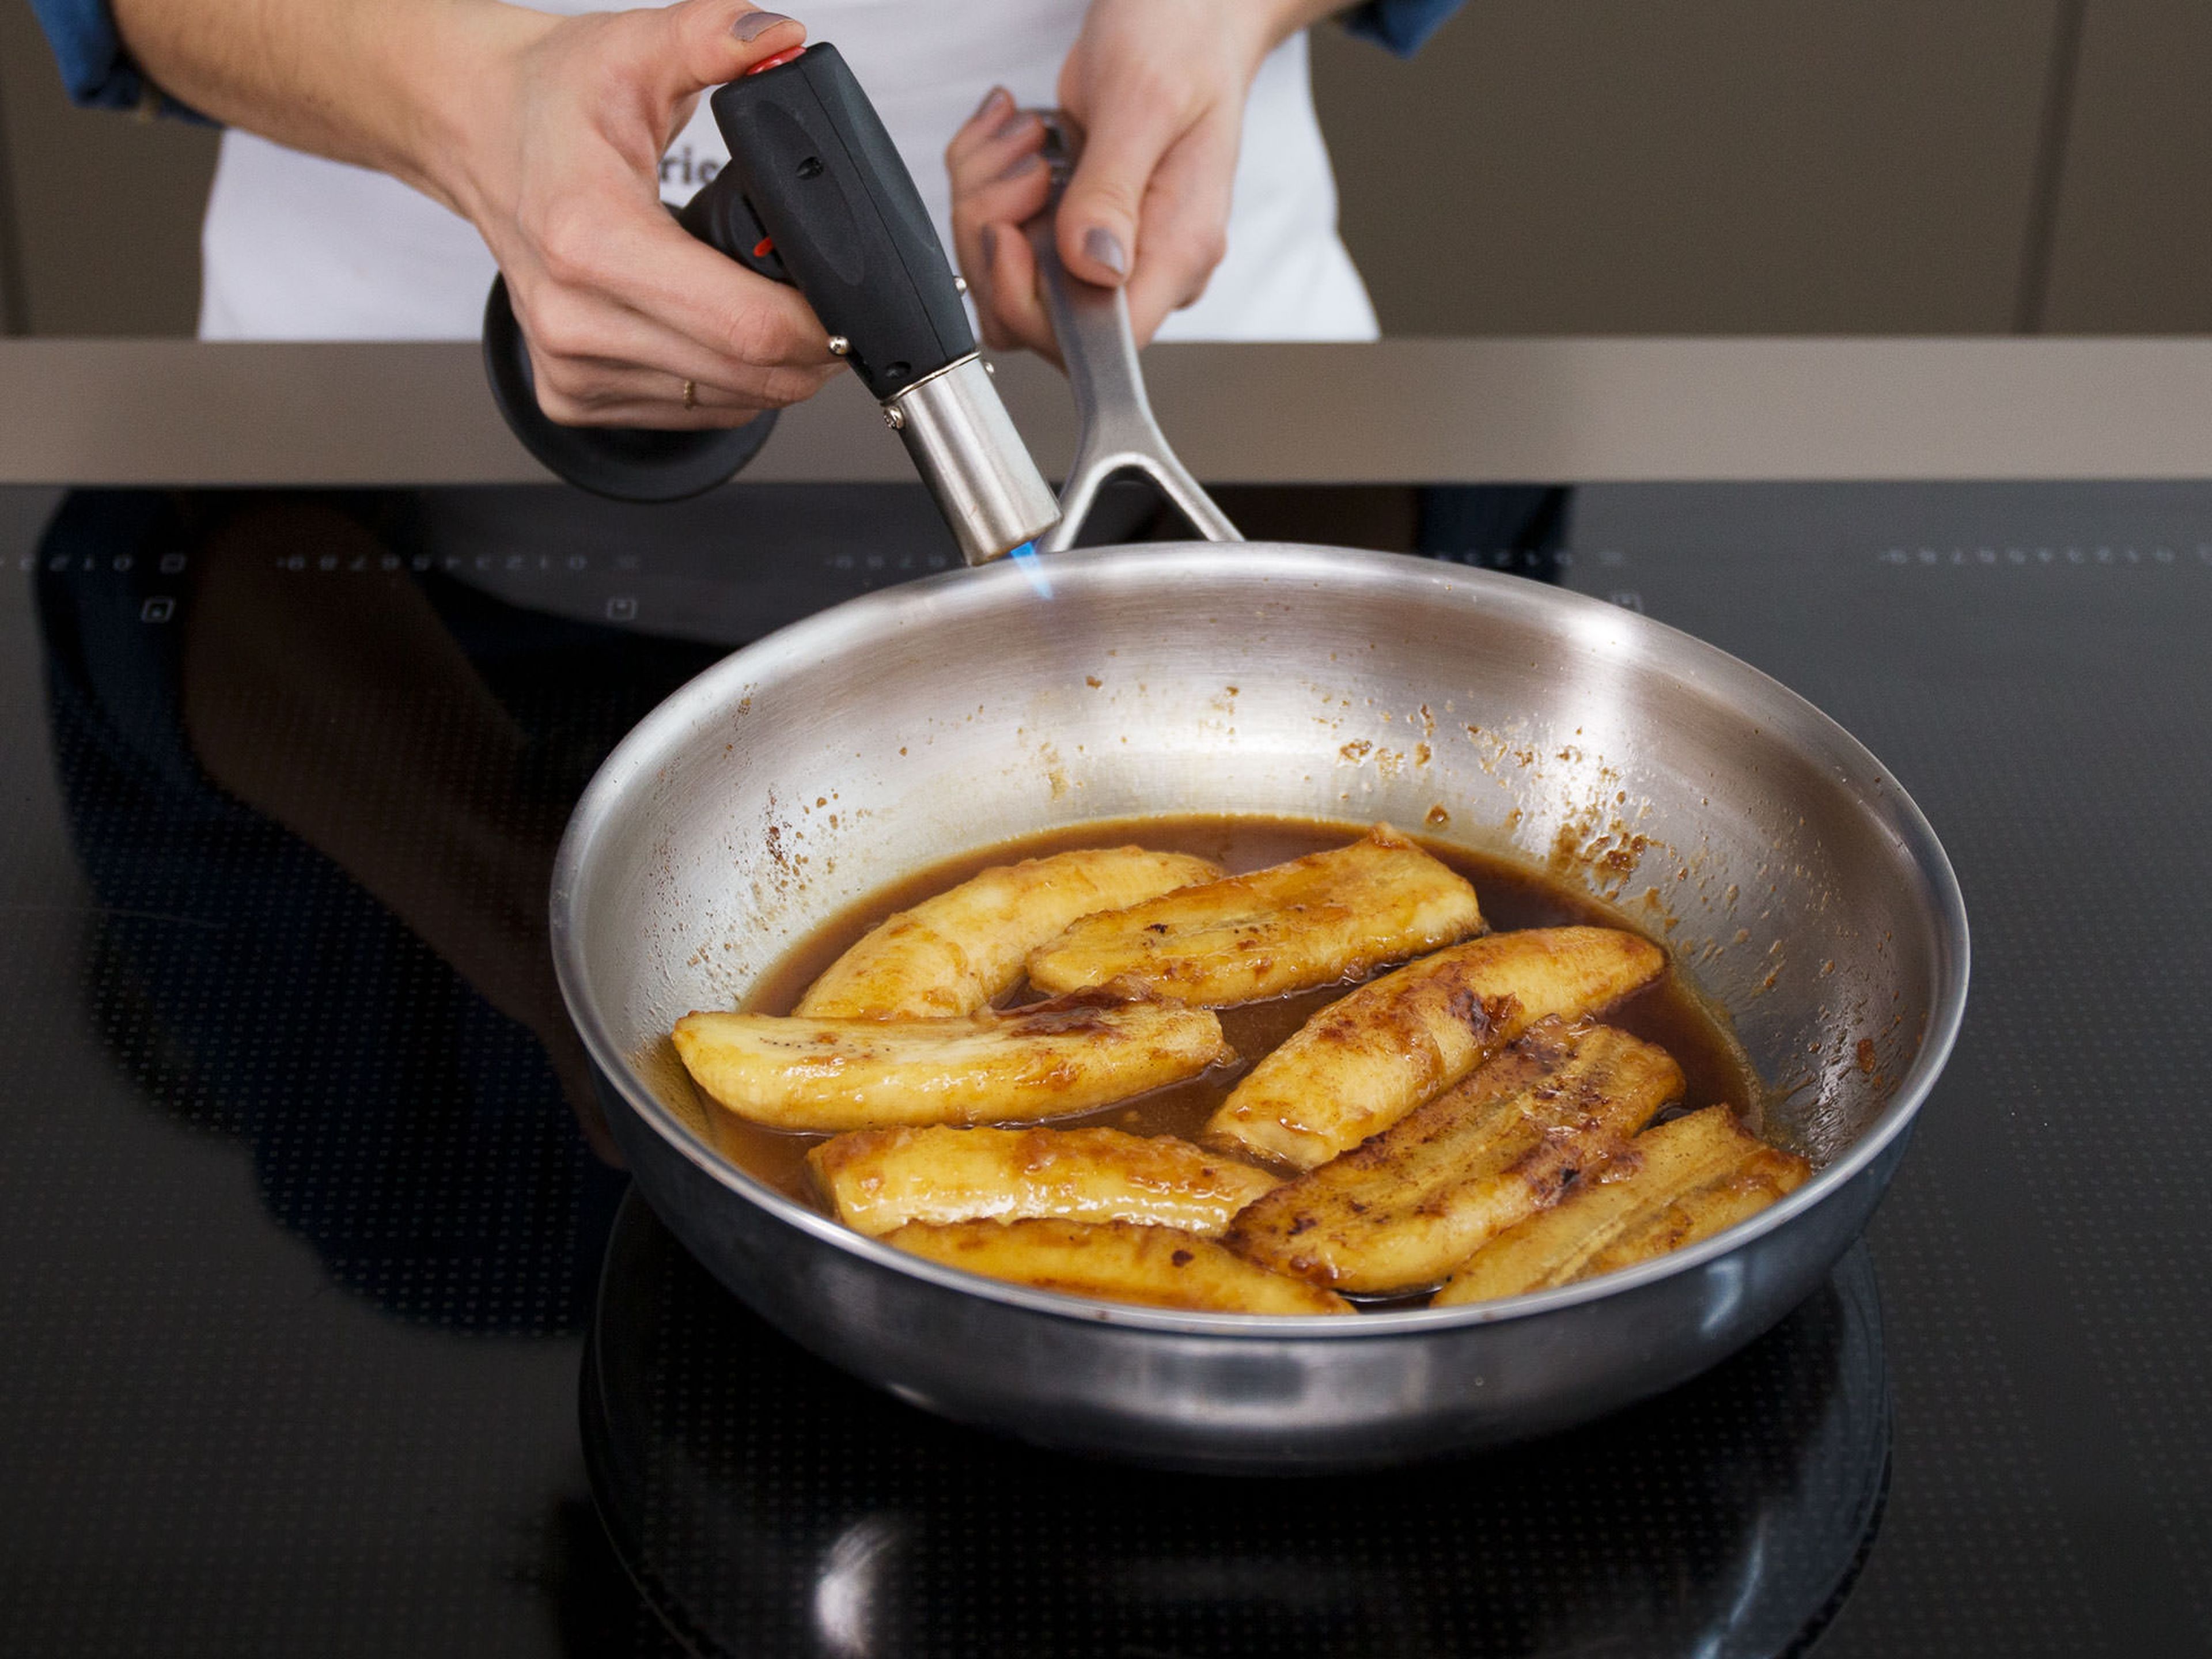 Add rum to the pan. Carefully flambé the sauce with a flambé torch. Gently toss the bananas in the flaming sauce until the flame goes out. Remove the bananas from the pan and heat the sauce over medium heat, whisking until it reduces to a thick caramel consistency.